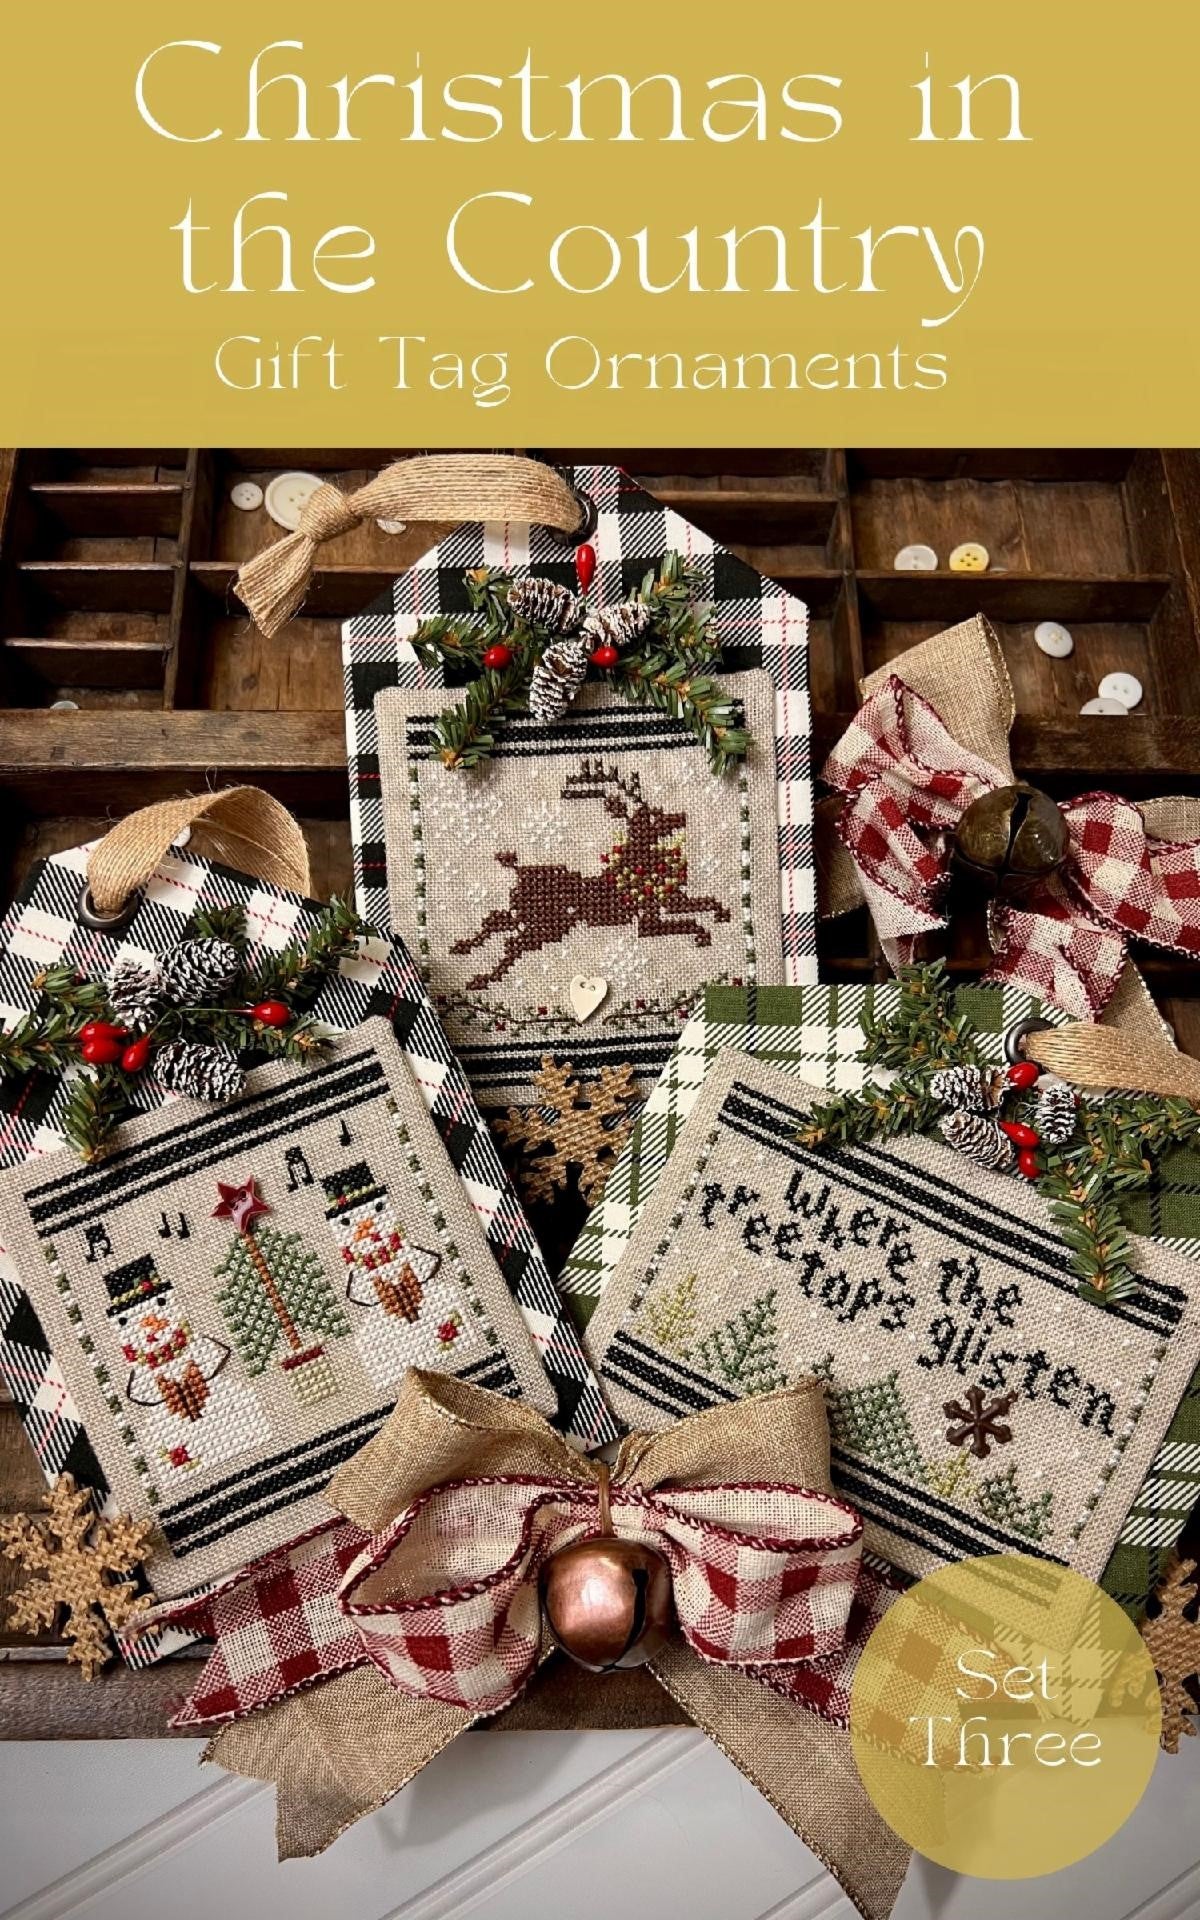 Christmas In The Country Set 3 by Annie Beez Folk Art